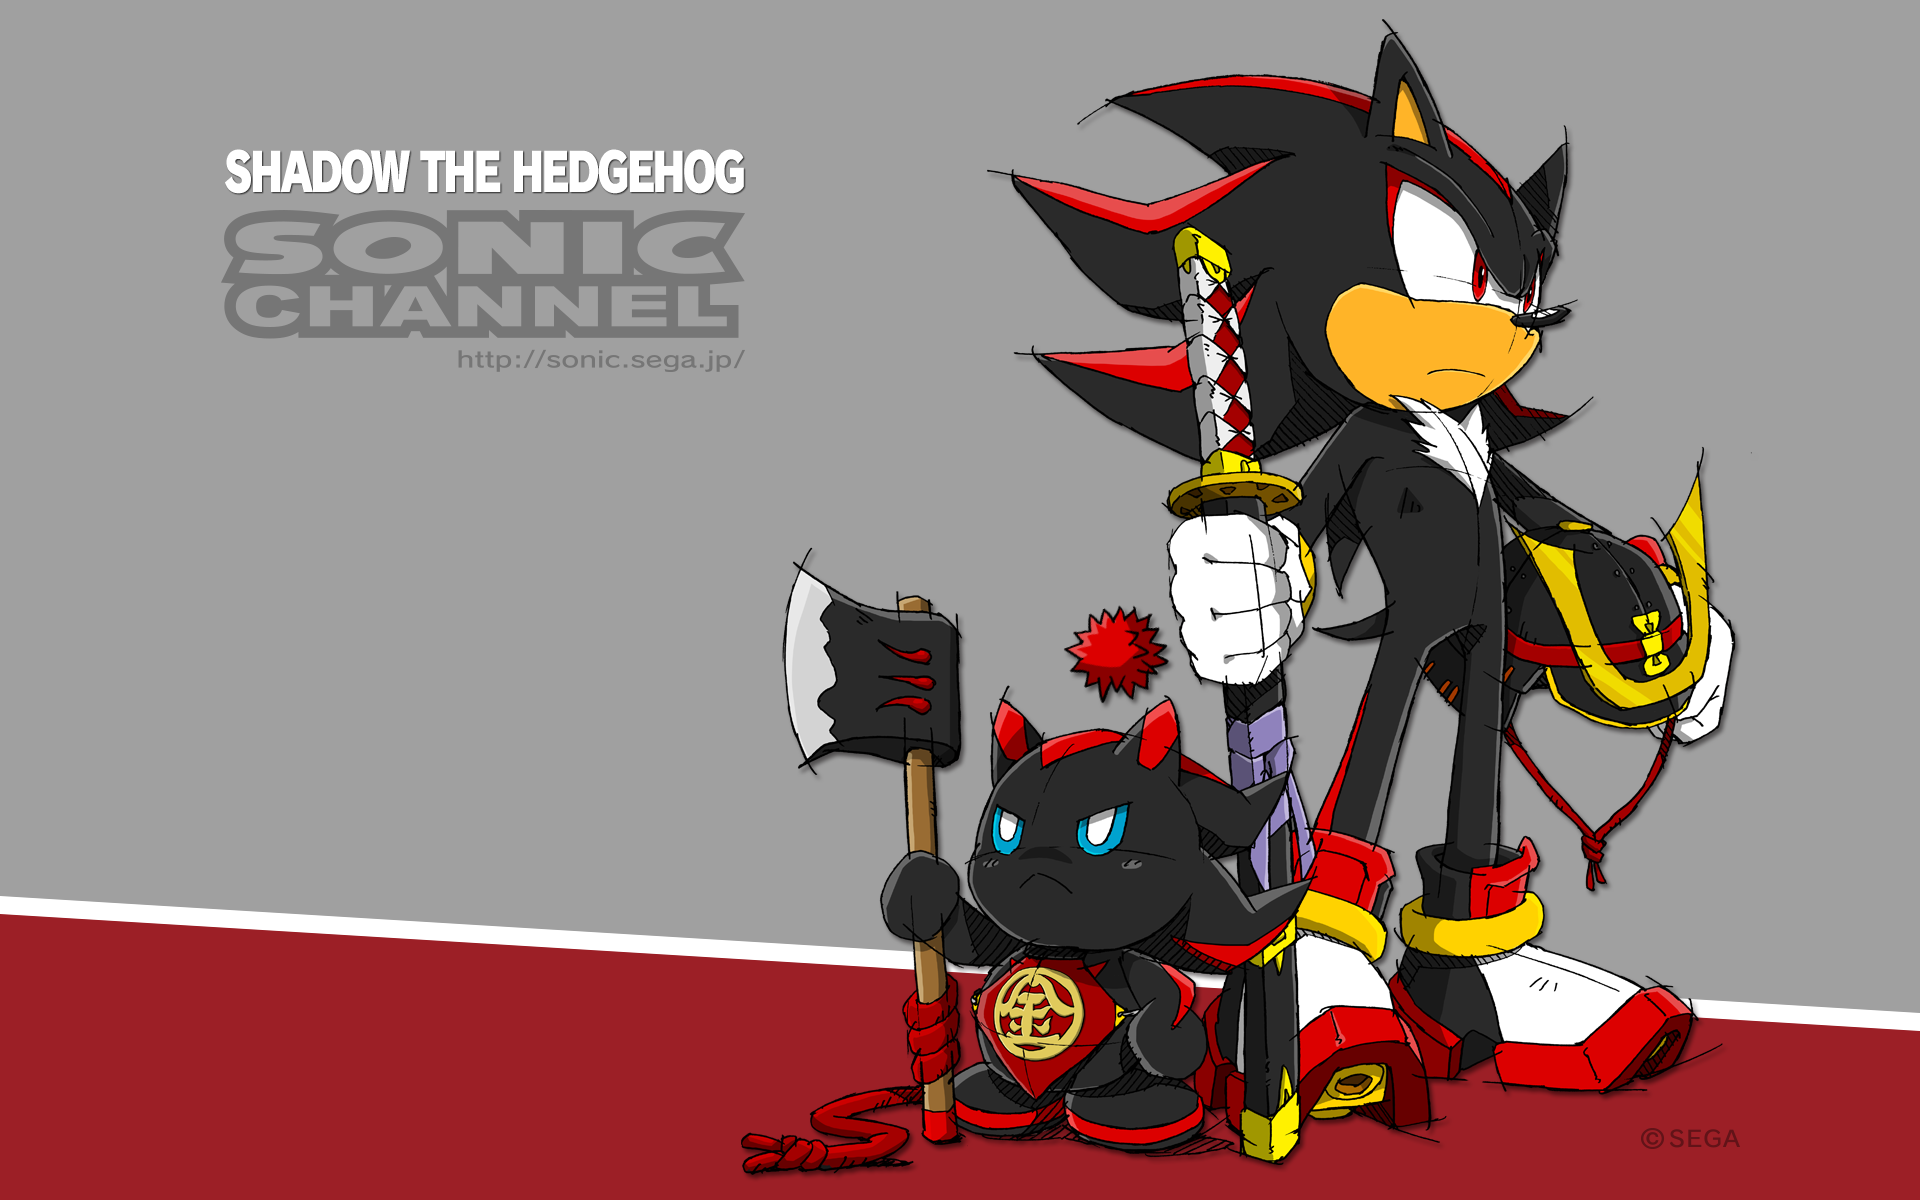 [download This Wallpaper For Pc] - Shadow The Hedgehog And Chao - HD Wallpaper 